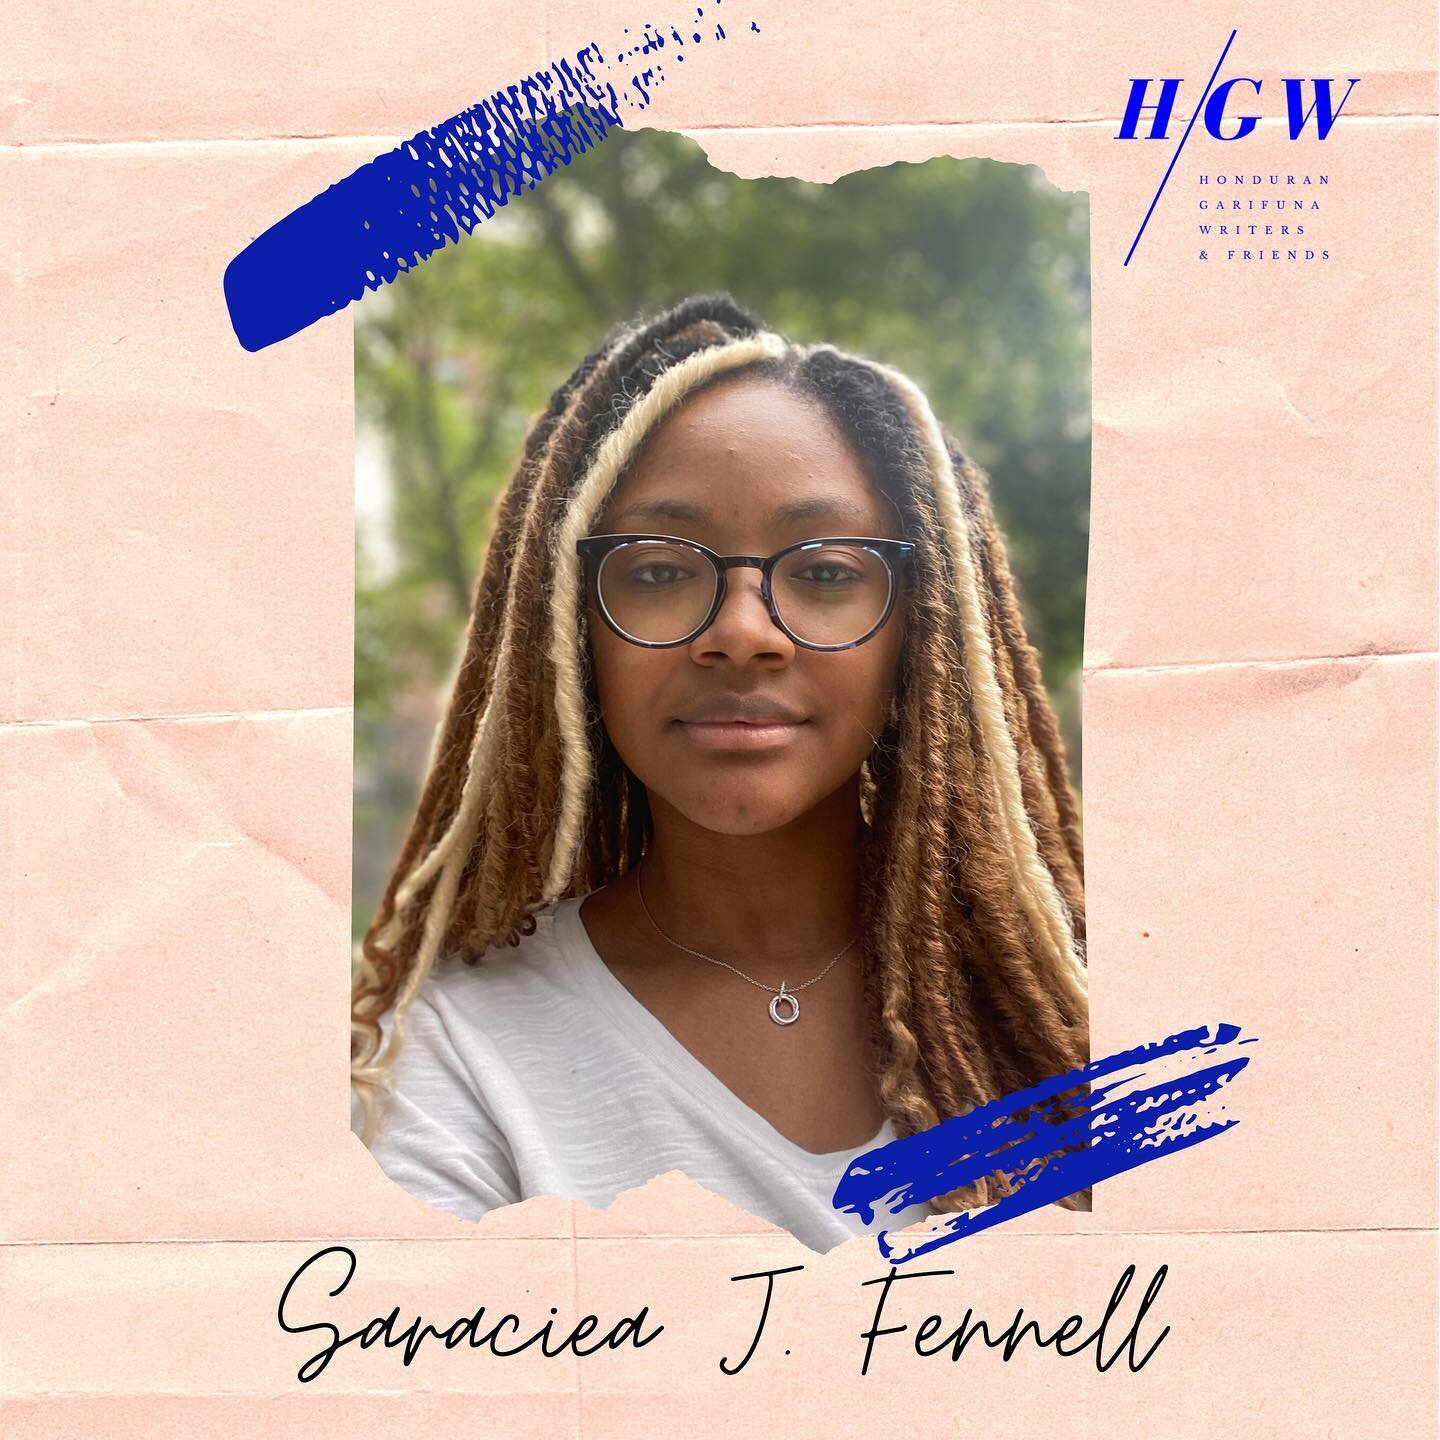 Hello! My name is Saraciea Fennell @sj_fennell. I&rsquo;m Honduran-Garifuna (and mixed with other stuff but I&rsquo;ll table that for that). I&rsquo;ve created this writers group to uplift Honduran, Garifuna, &amp; Central American writers. The publi